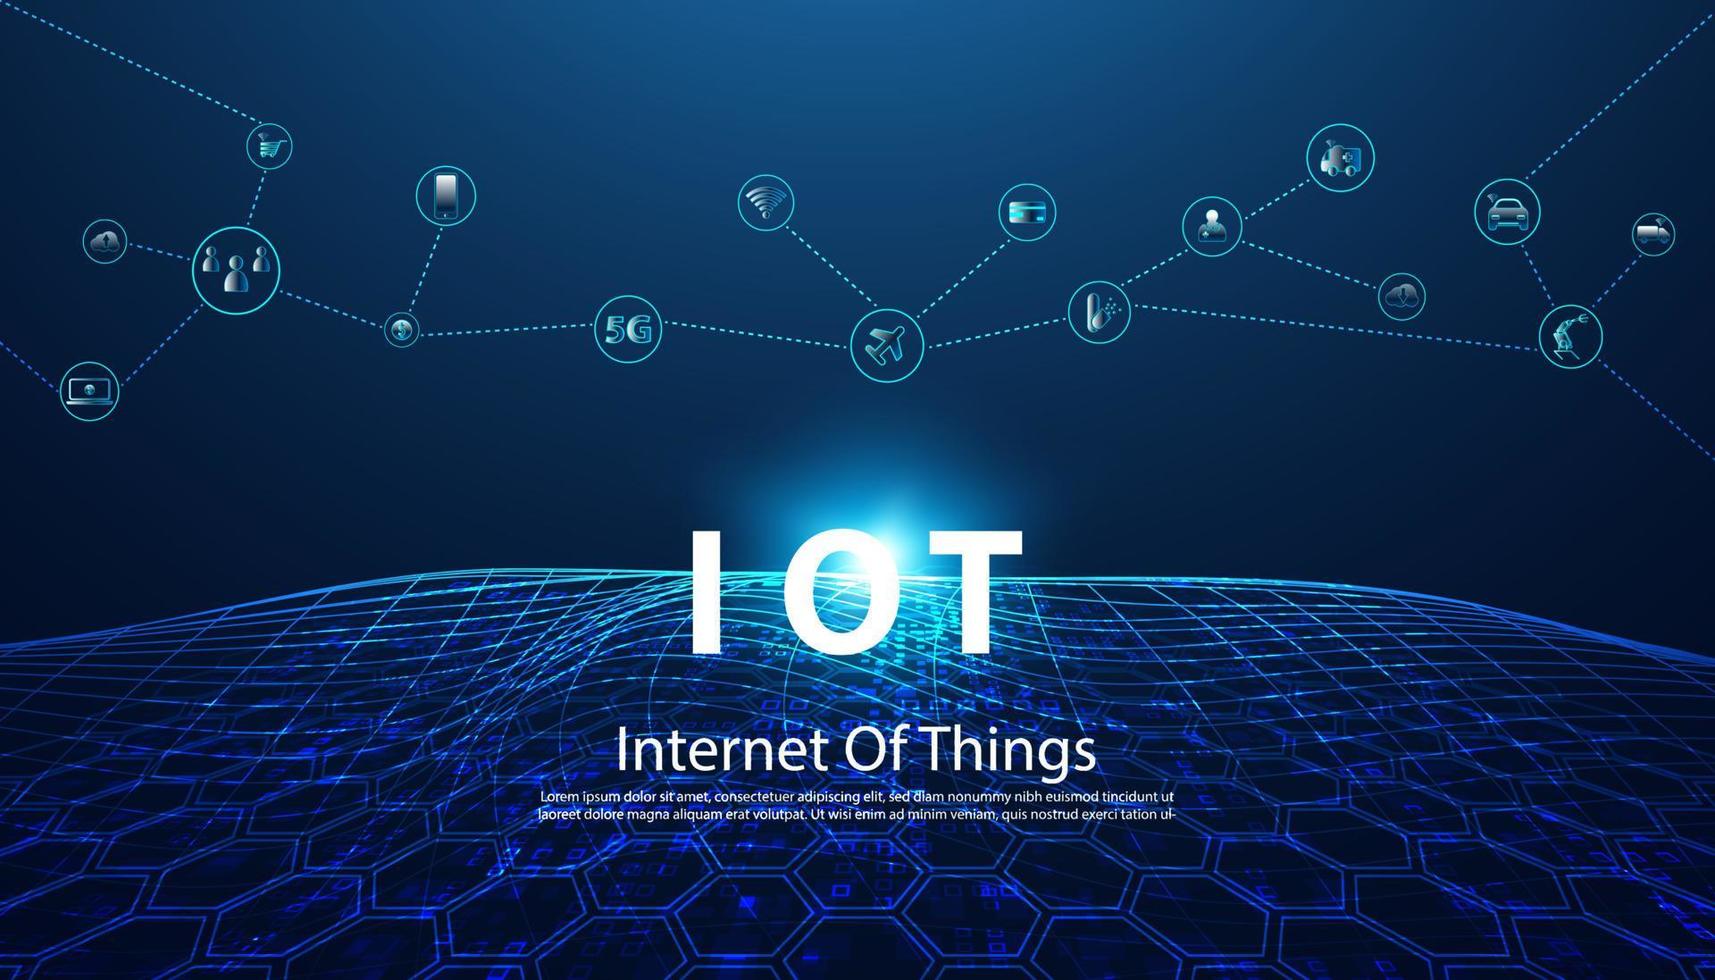 Abstract Internet of things Concept city 5G.IoT Internet of Things communication network Innovation Technology Concept Icon. Connect wireless devices and networking Innovation Technology. vector